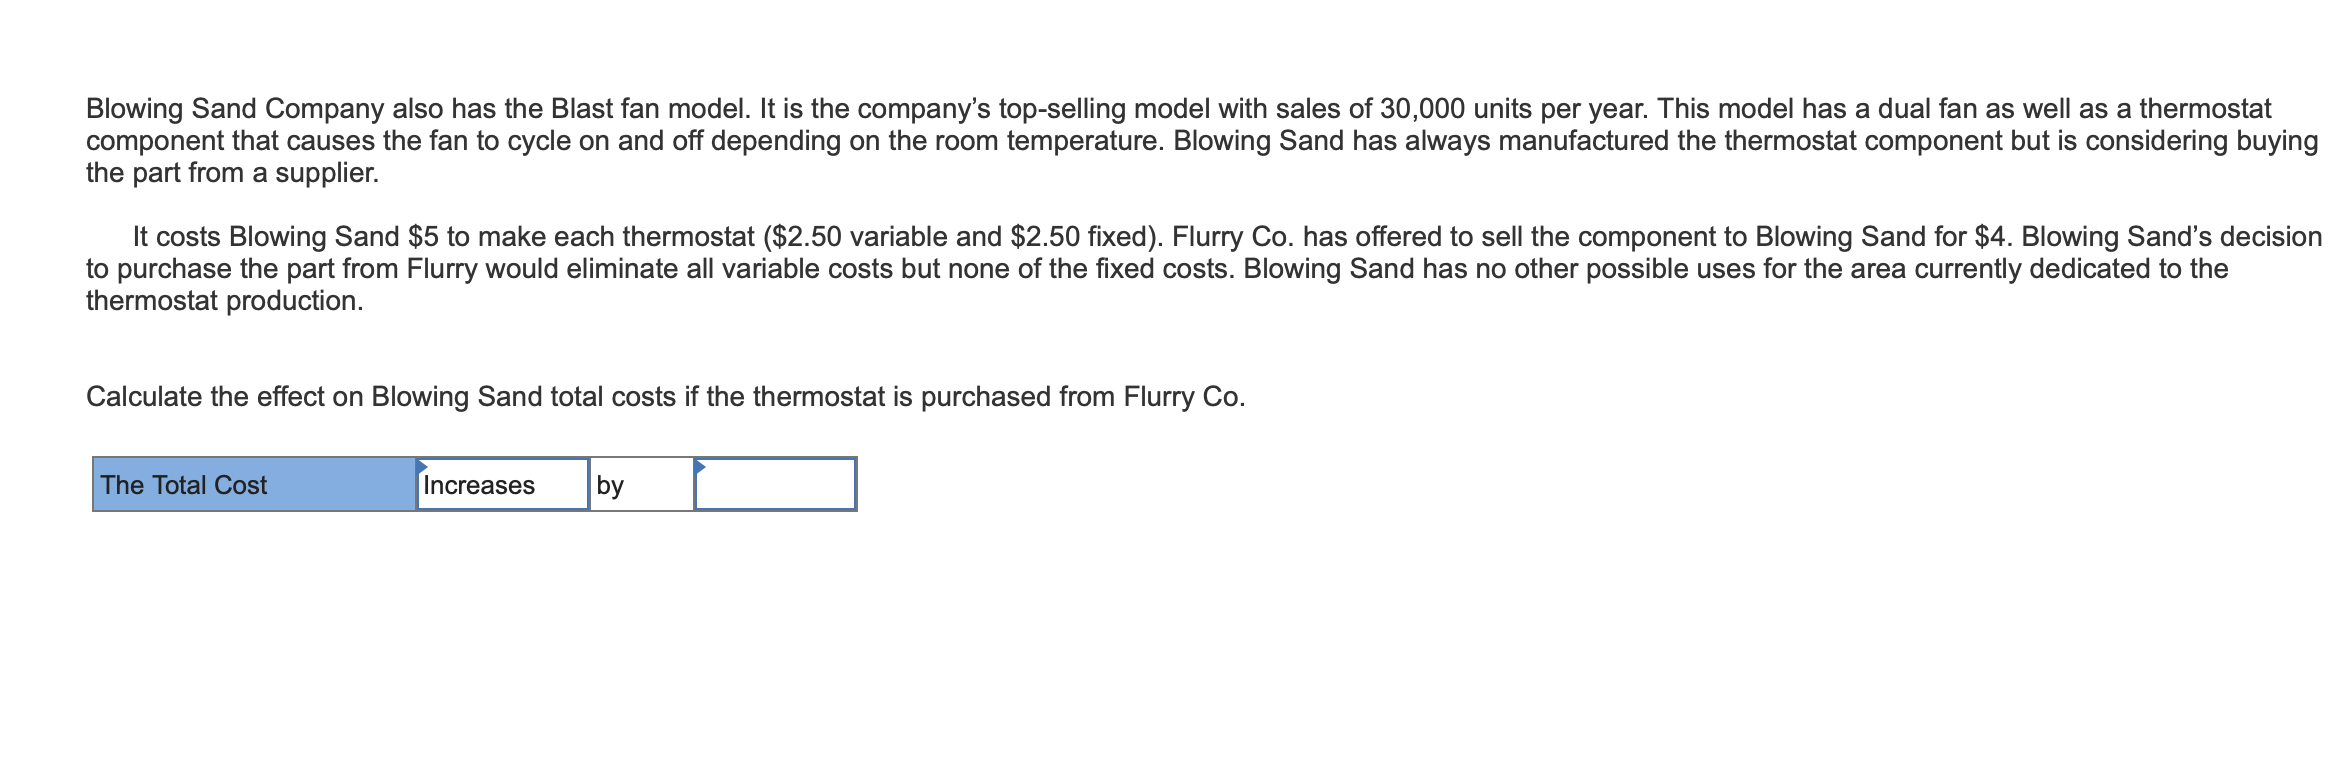 Blowing Sand Company also has the Blast fan model. It is the company's top-selling model with sales of 30,000 units per year. This model has a dual fan as well as a thermostat
component that causes the fan to cycle on and off depending on the room temperature. Blowing Sand has always manufactured the thermostat component but is considering buying
the part from a supplier.
It costs Blowing Sand $5 to make each thermostat ($2.50 variable and $2.50 fixed). Flurry Co. has offered to sell the component to Blowing Sand for $4. Blowing Sand's decision
to purchase the part from Flurry would eliminate all variable costs but none of the fixed costs. Blowing Sand has no other possible uses for the area currently dedicated to the
thermostat production
Calculate the effect on Blowing Sand total costs if the thermostat is purchased from Flurry Co.
Increases
by
The Total Cost
